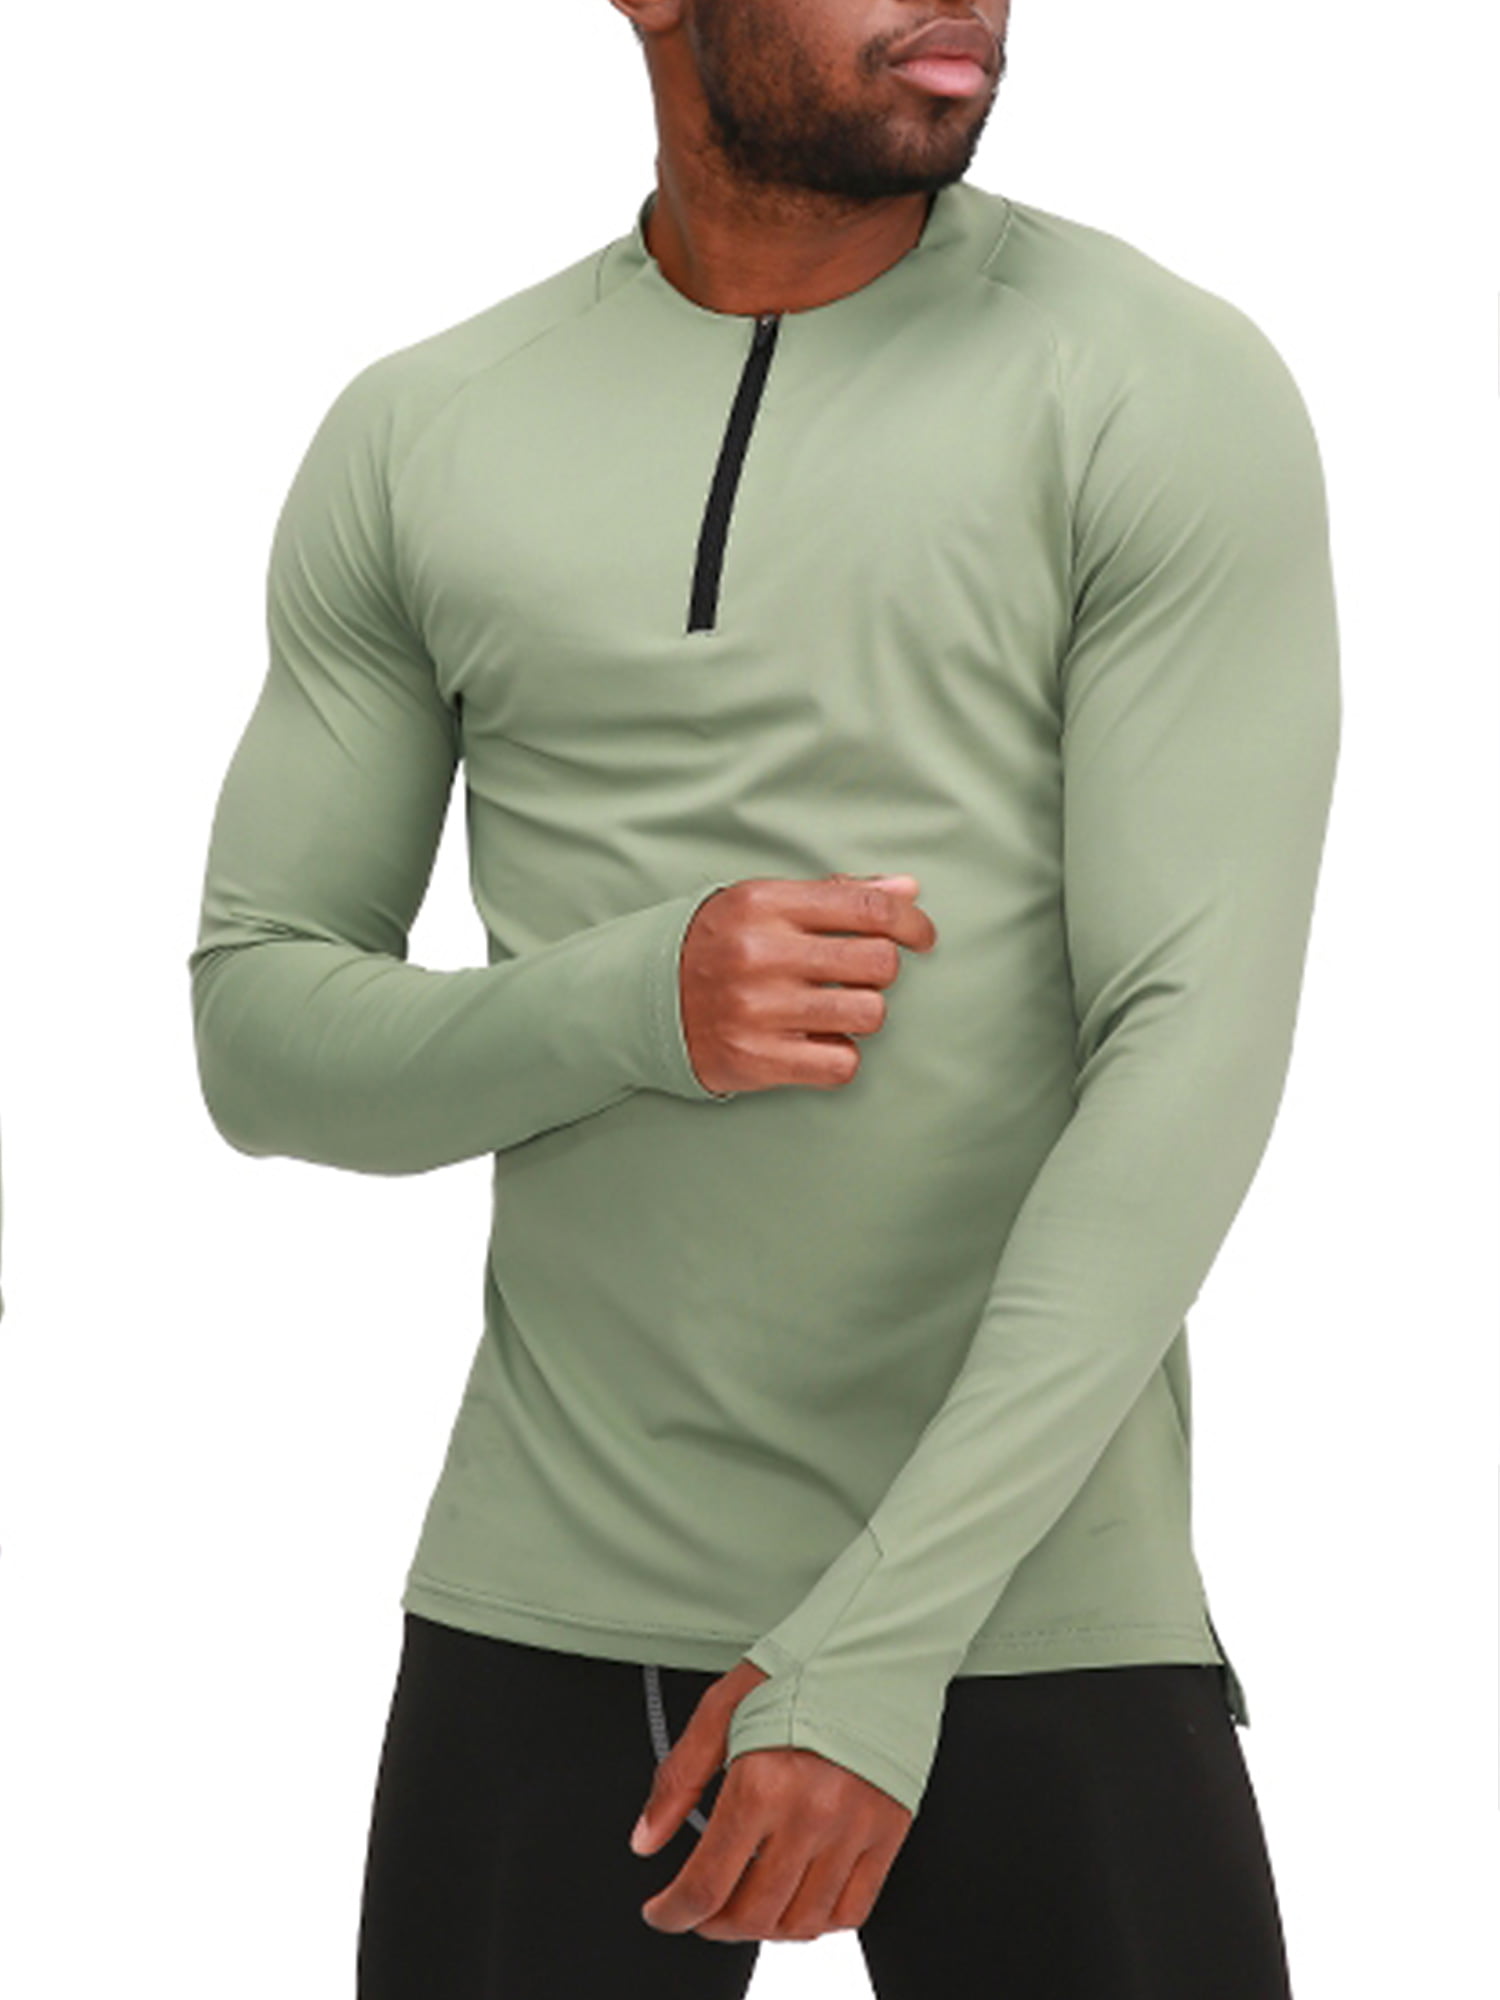 Mens Long Sleeve 1/4 Zip Running Top Quick Dry Lightweight Breathable Sport Shirt for Workout Jogging Warm-up Gym Fitness 